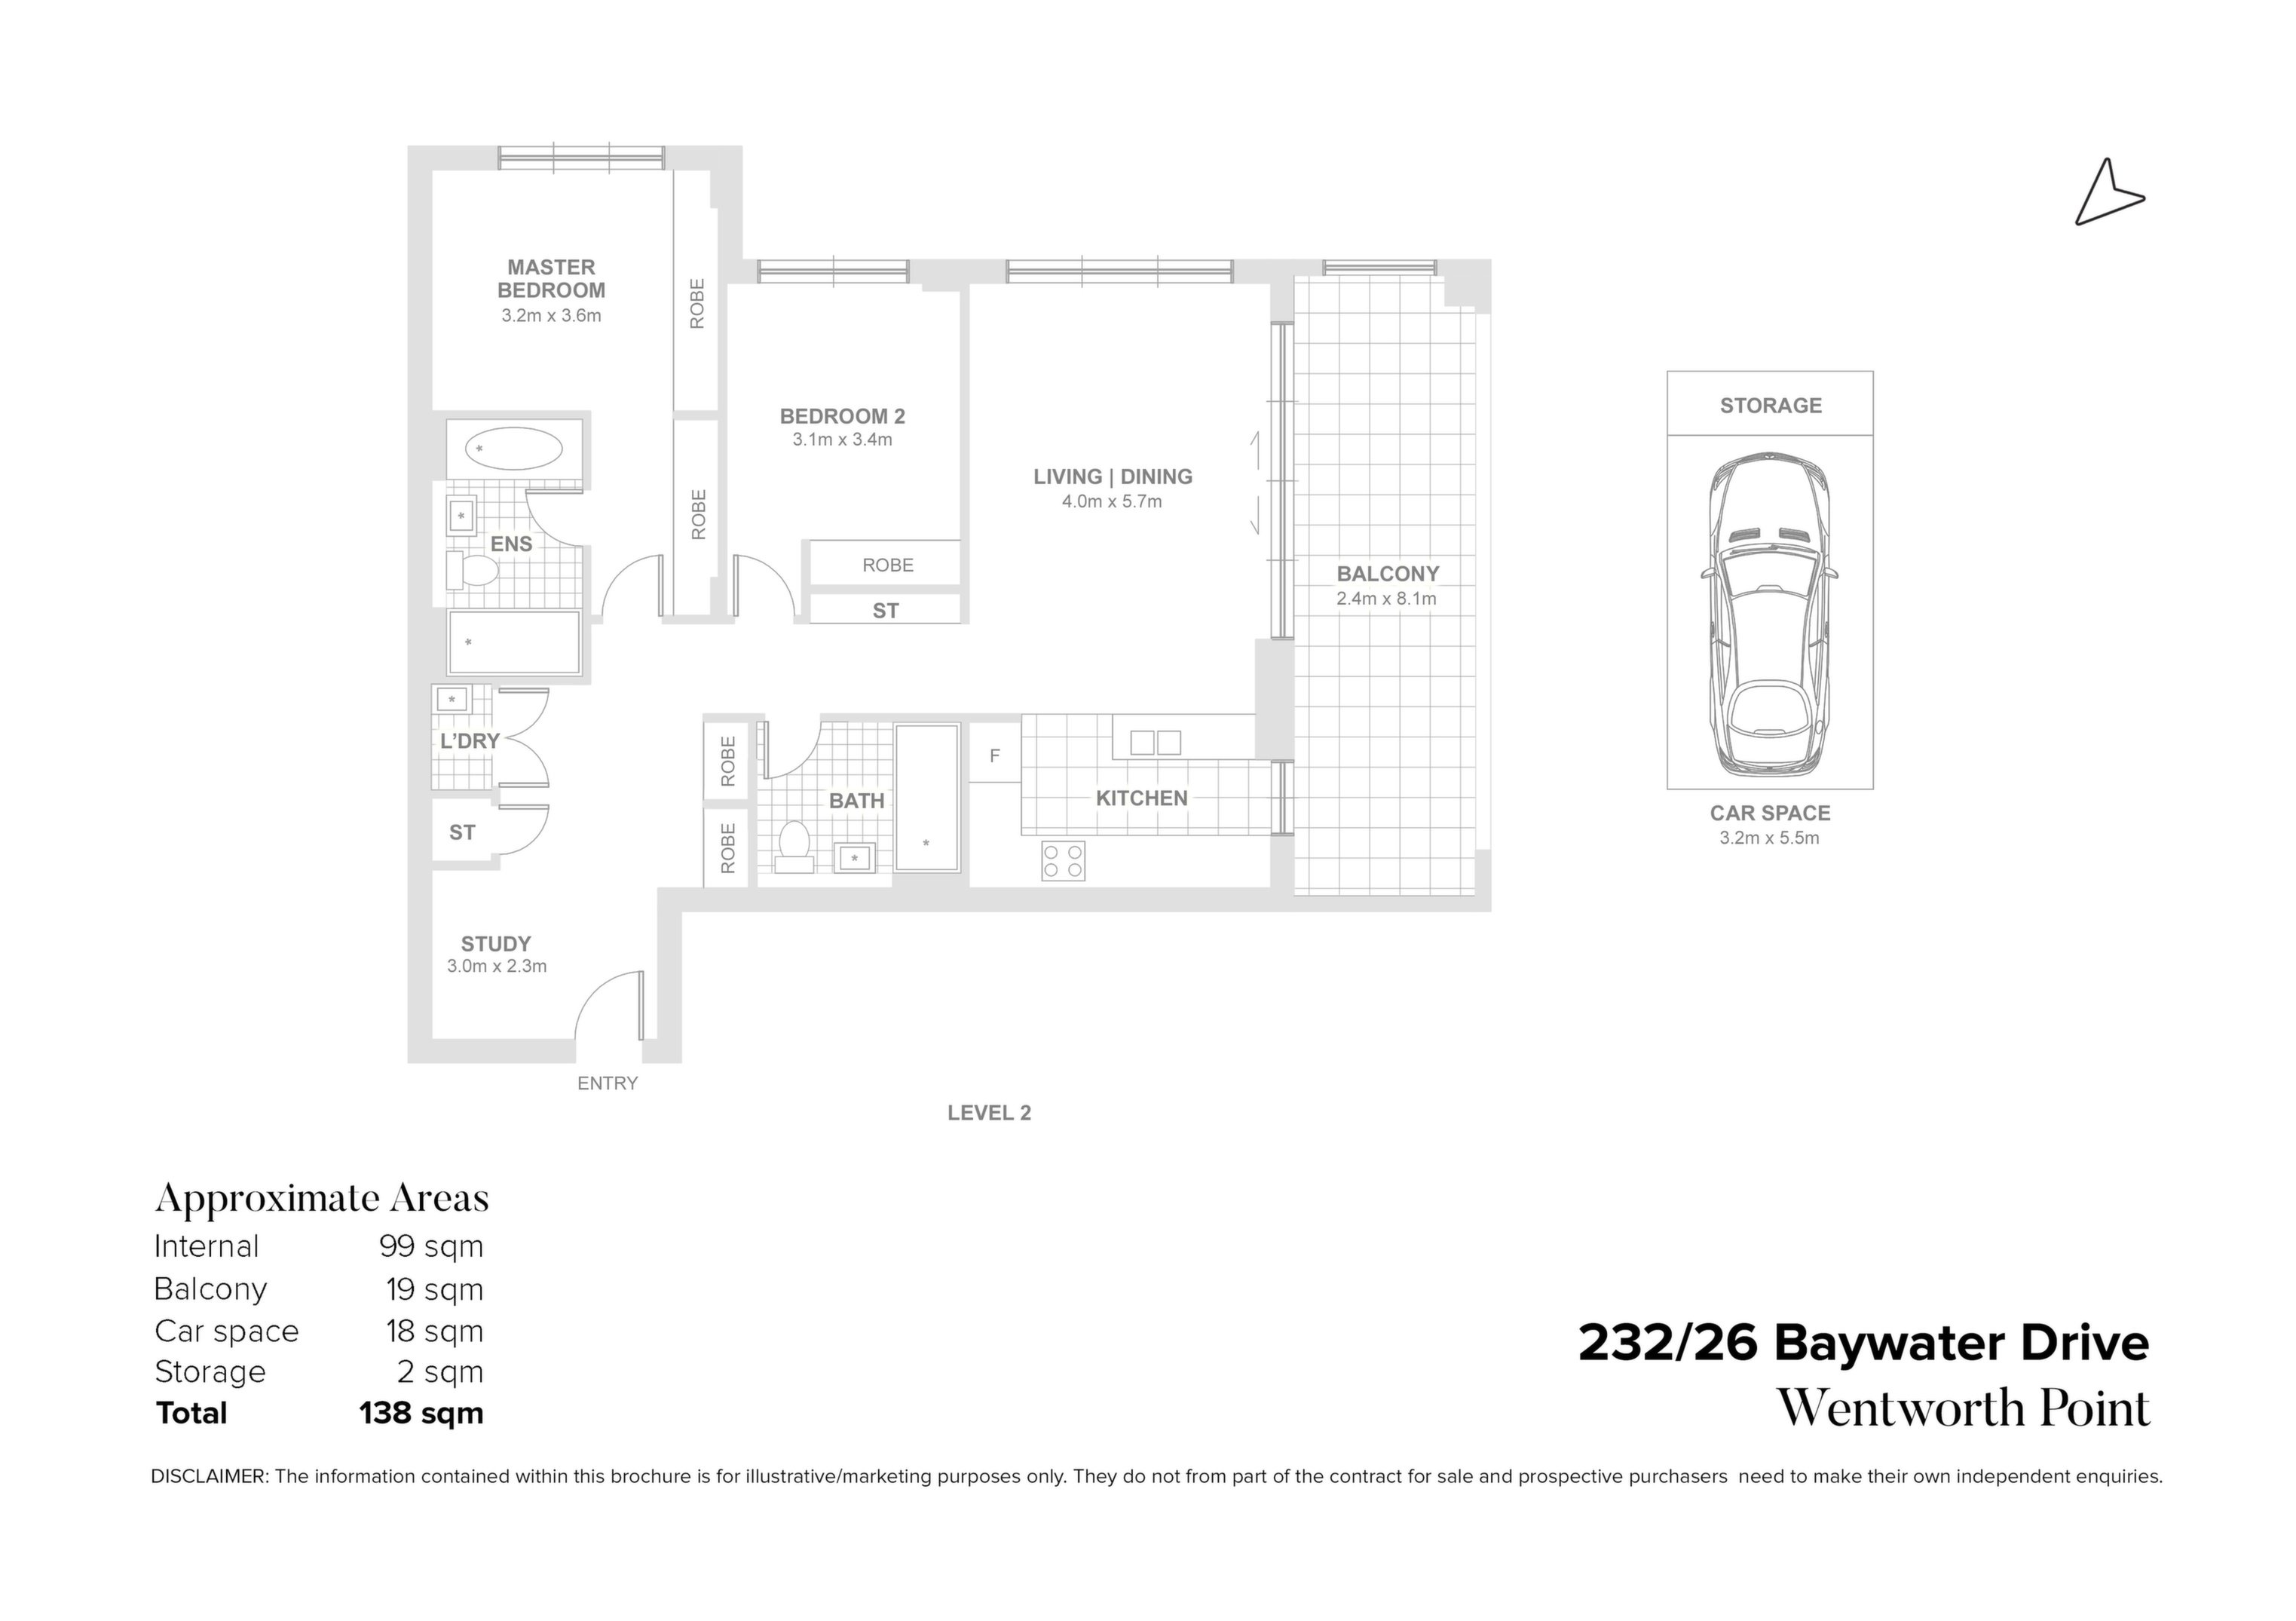 232/26 Baywater Drive, Wentworth Point Sold by Chidiac Realty - floorplan